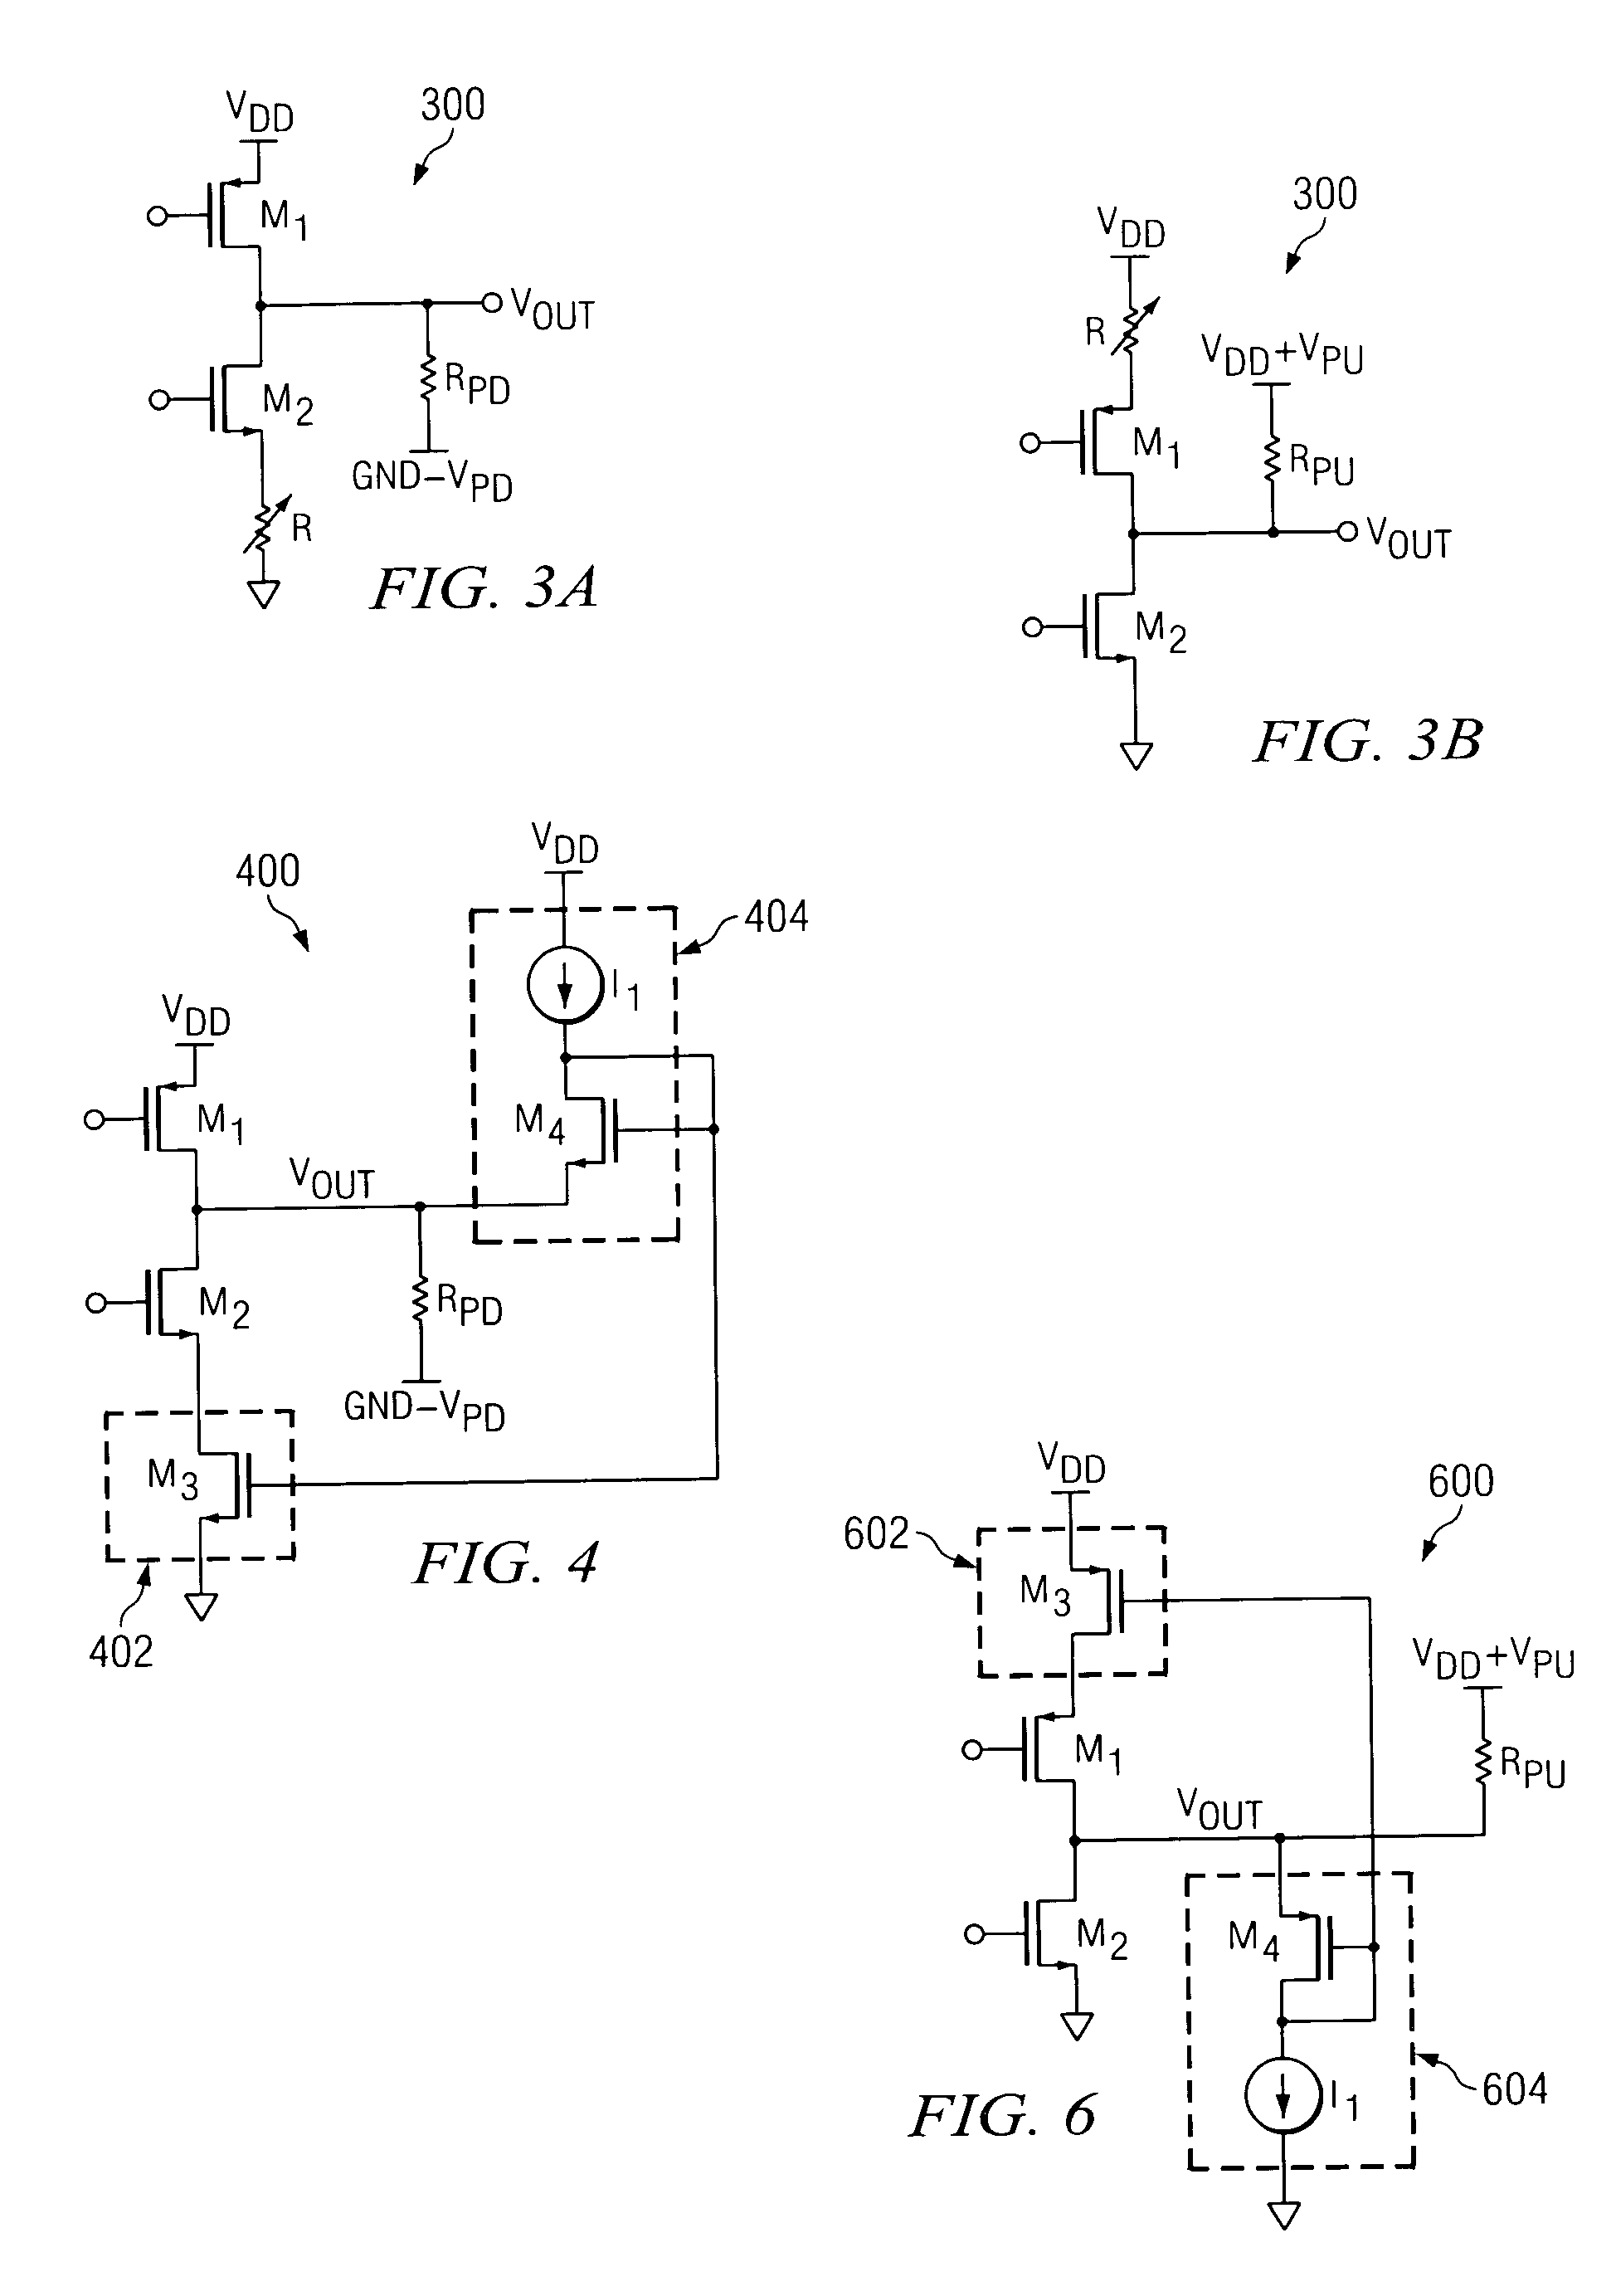 Output stage circuit for an operational amplifier